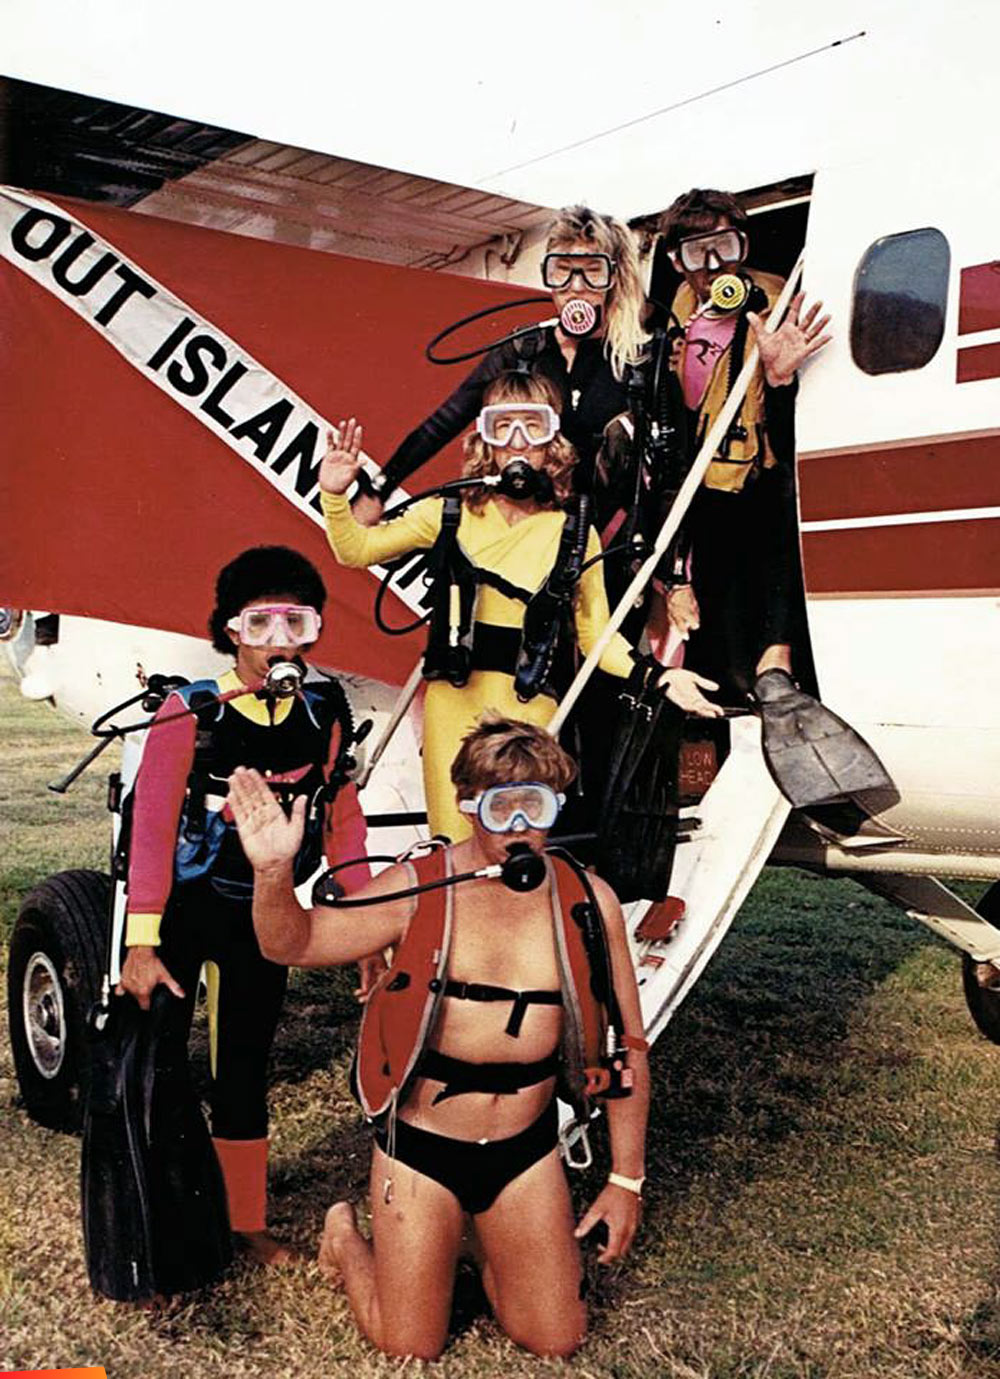 Ray Bowers, Linda Carter, Vicky Showler, Bruce Johnston, and Charlene Woods of Out Island Divers posing outside a Tropic Air plane, wearing scuba gear! 1990 or earlier